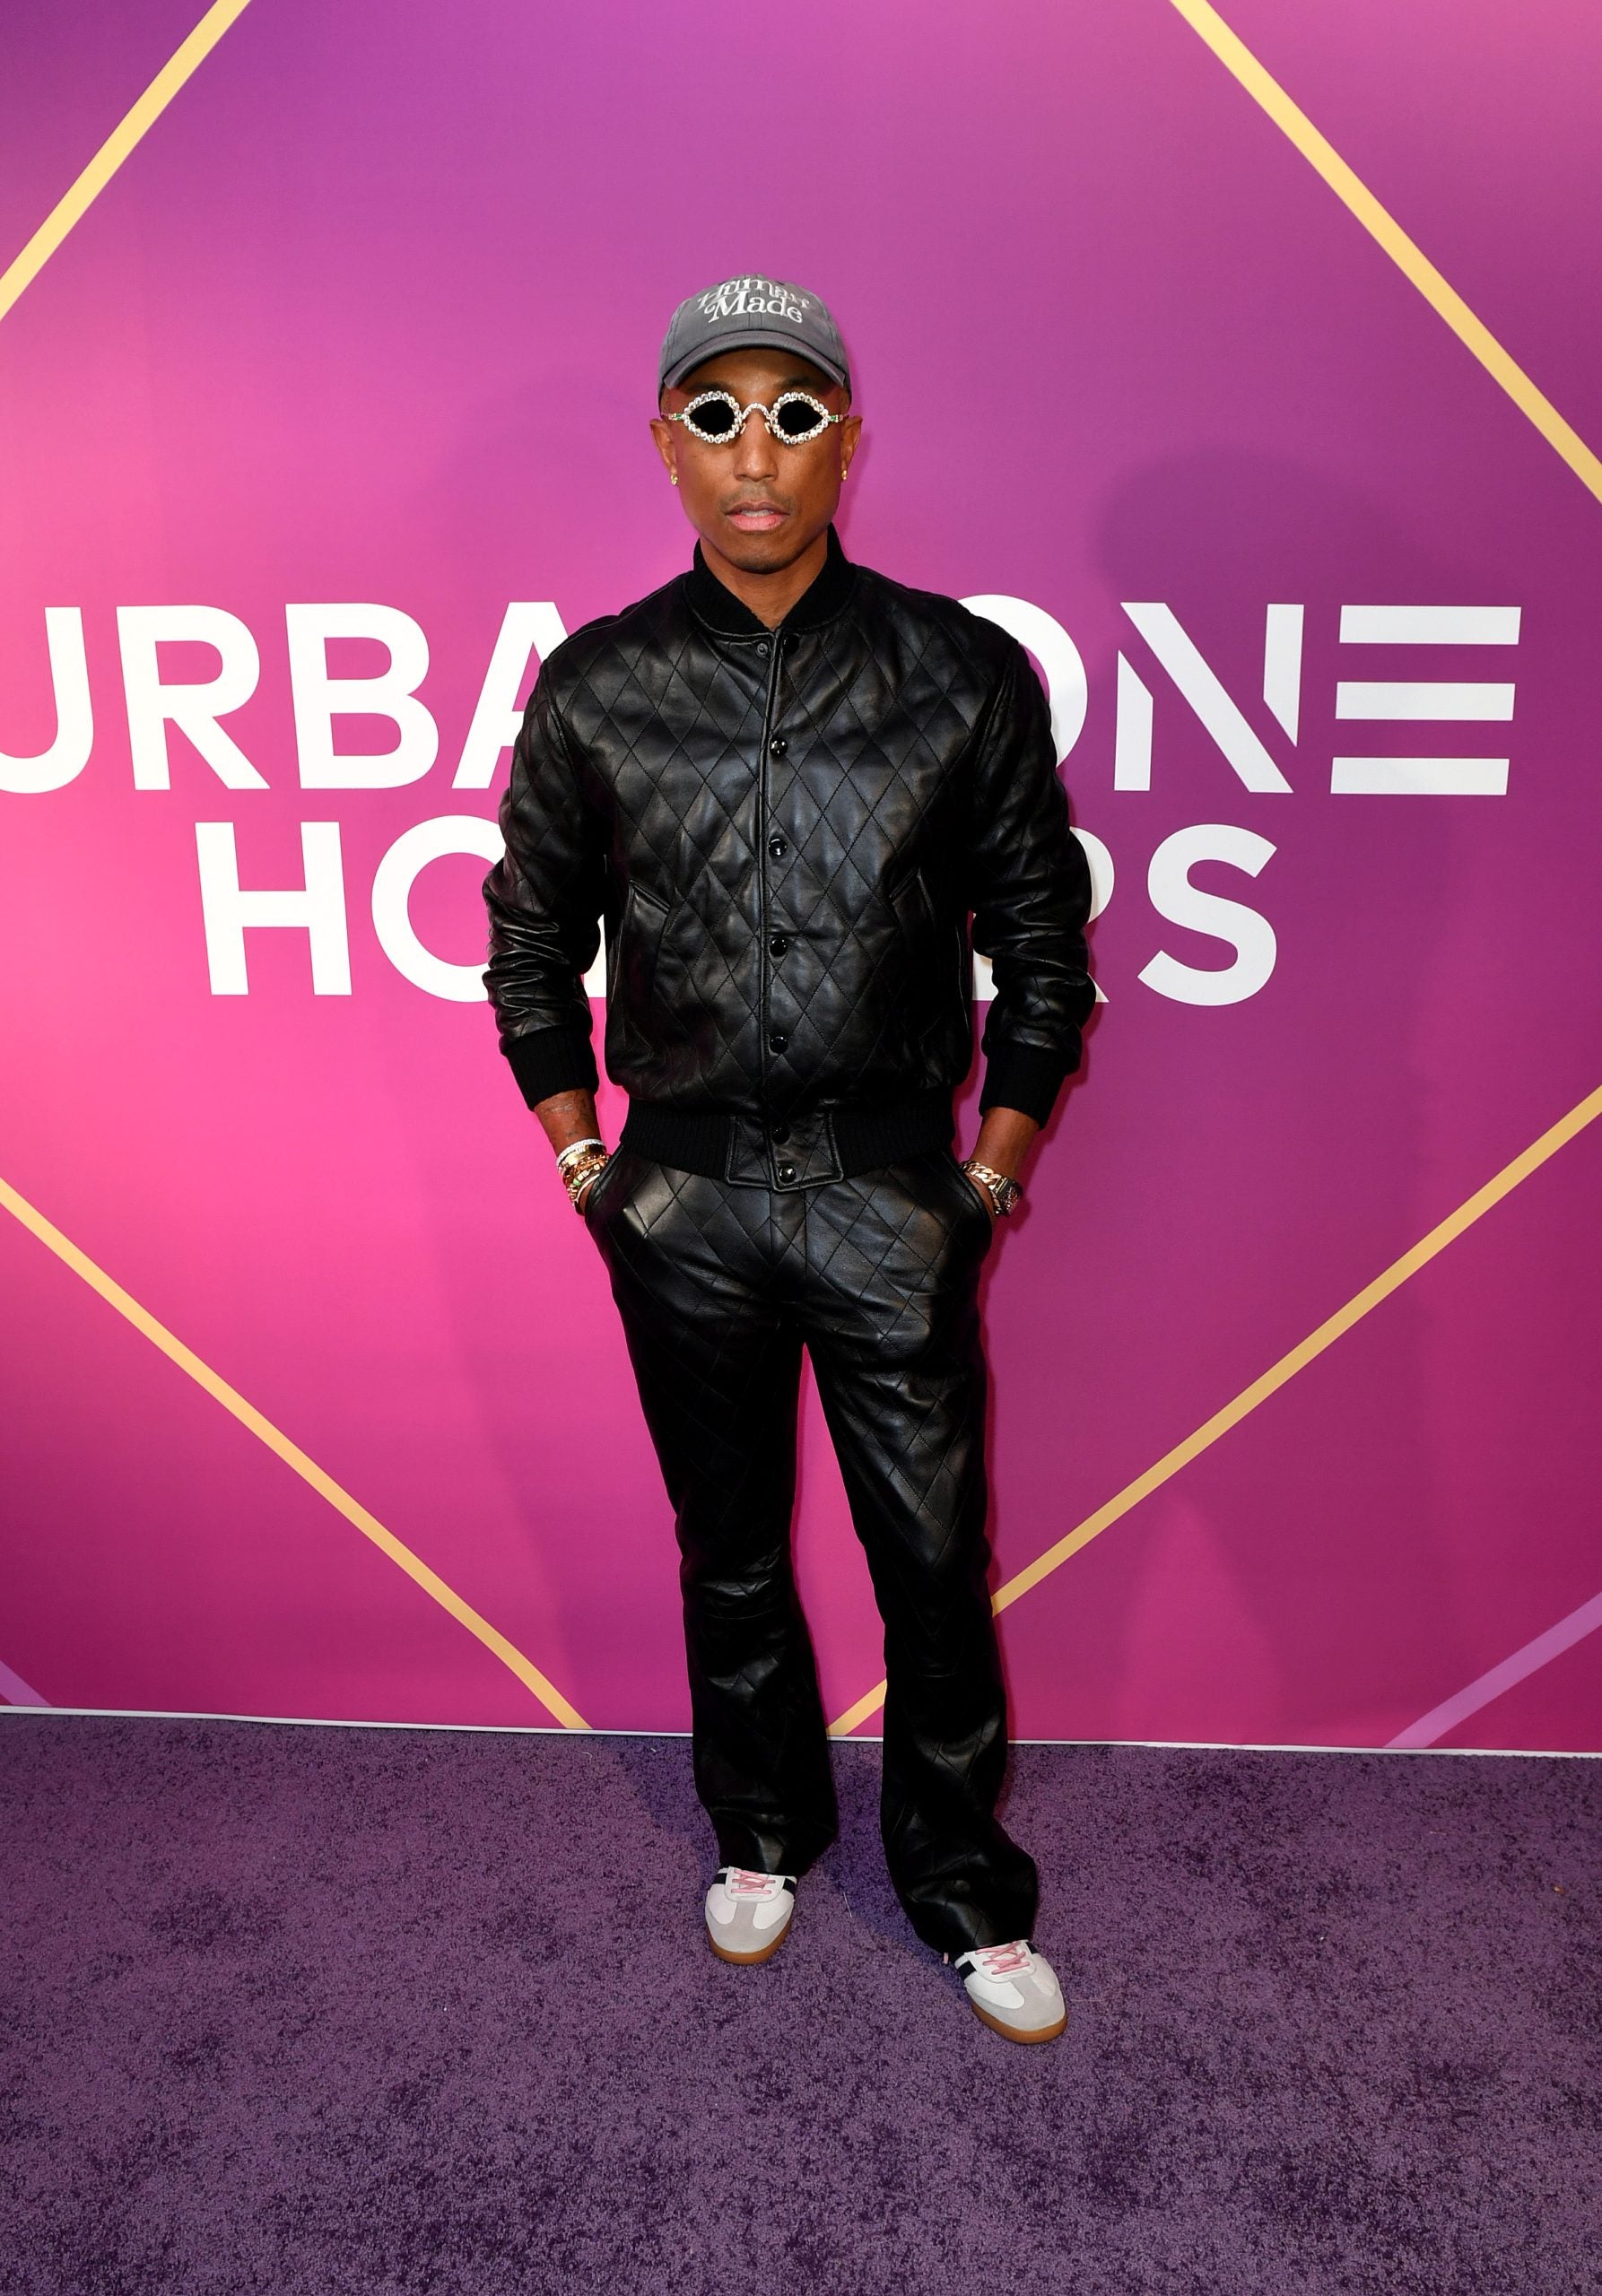 Star Gazing: Celebs Flock To Carpets For The People's Choice Awards, Urban One Honors & More